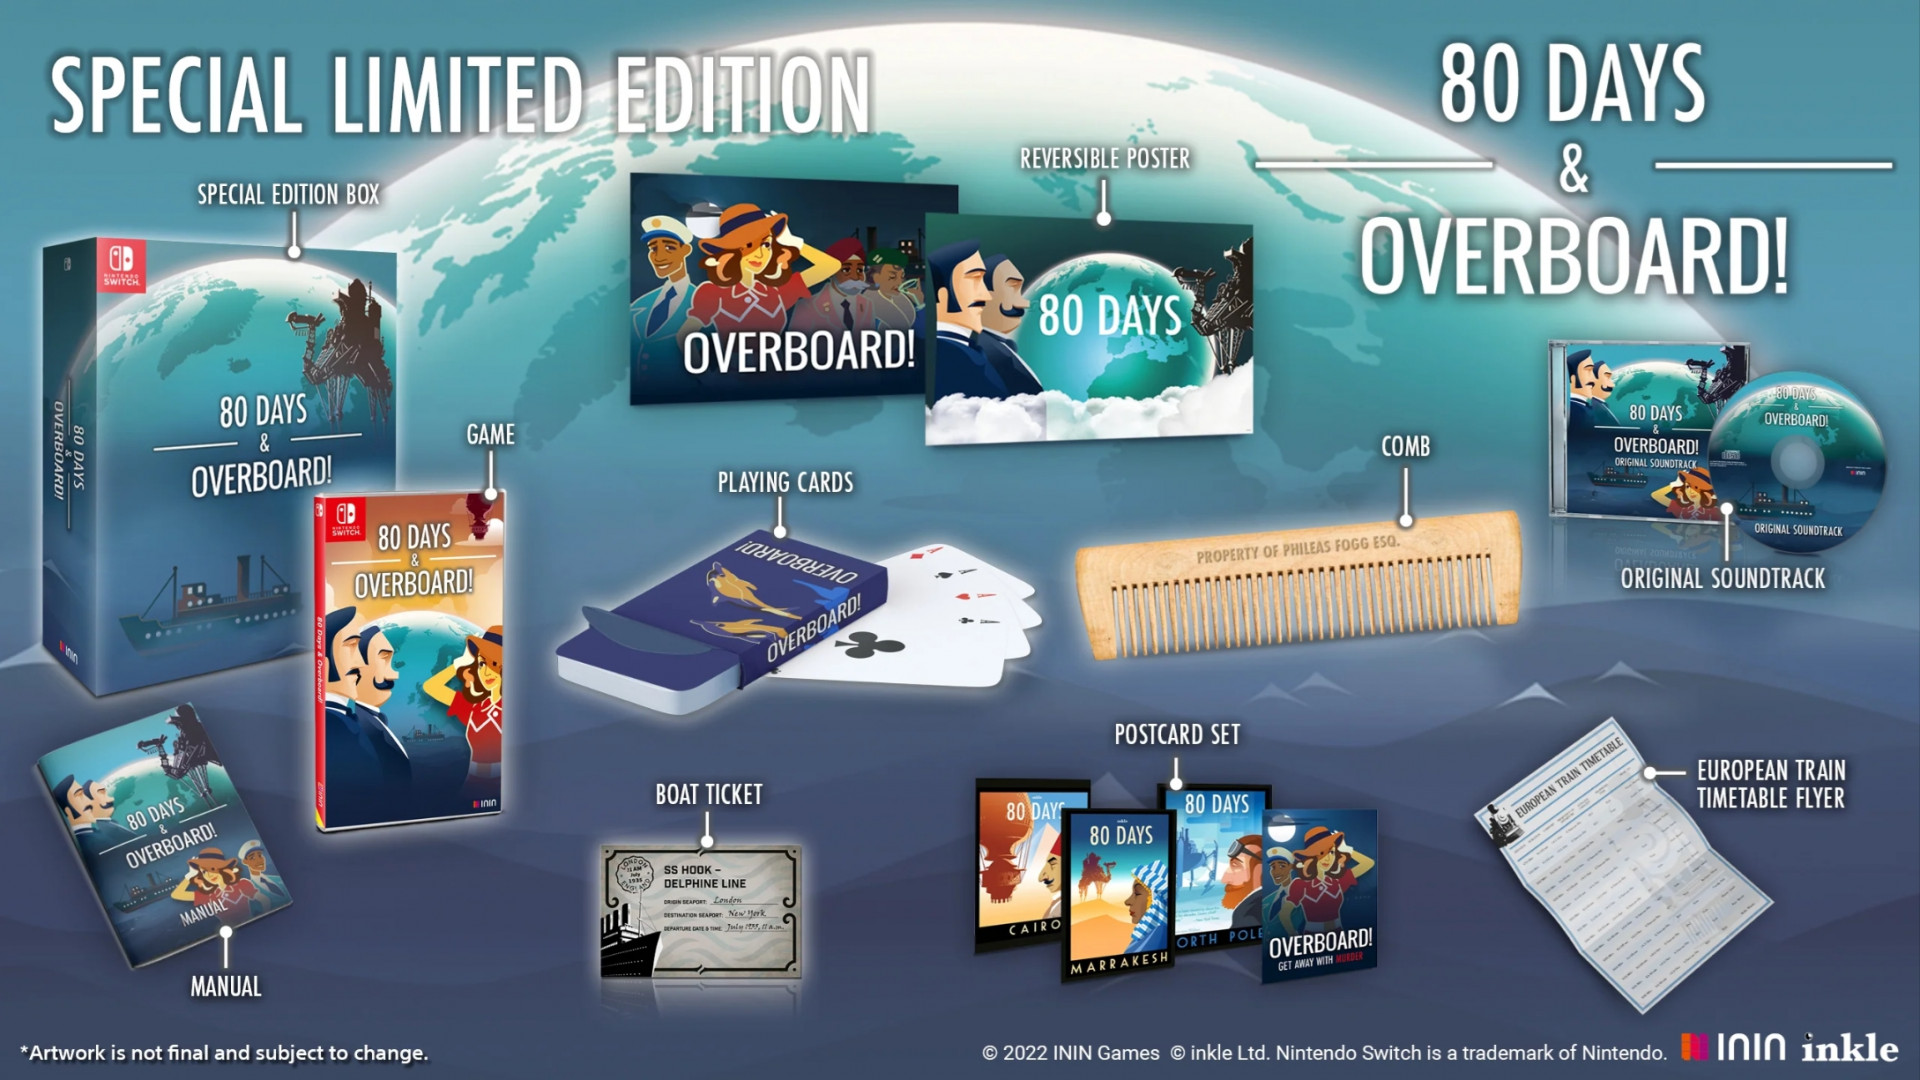 80 days & overboard! Special limited edition / Strictly limited games / Switch / 999 copies